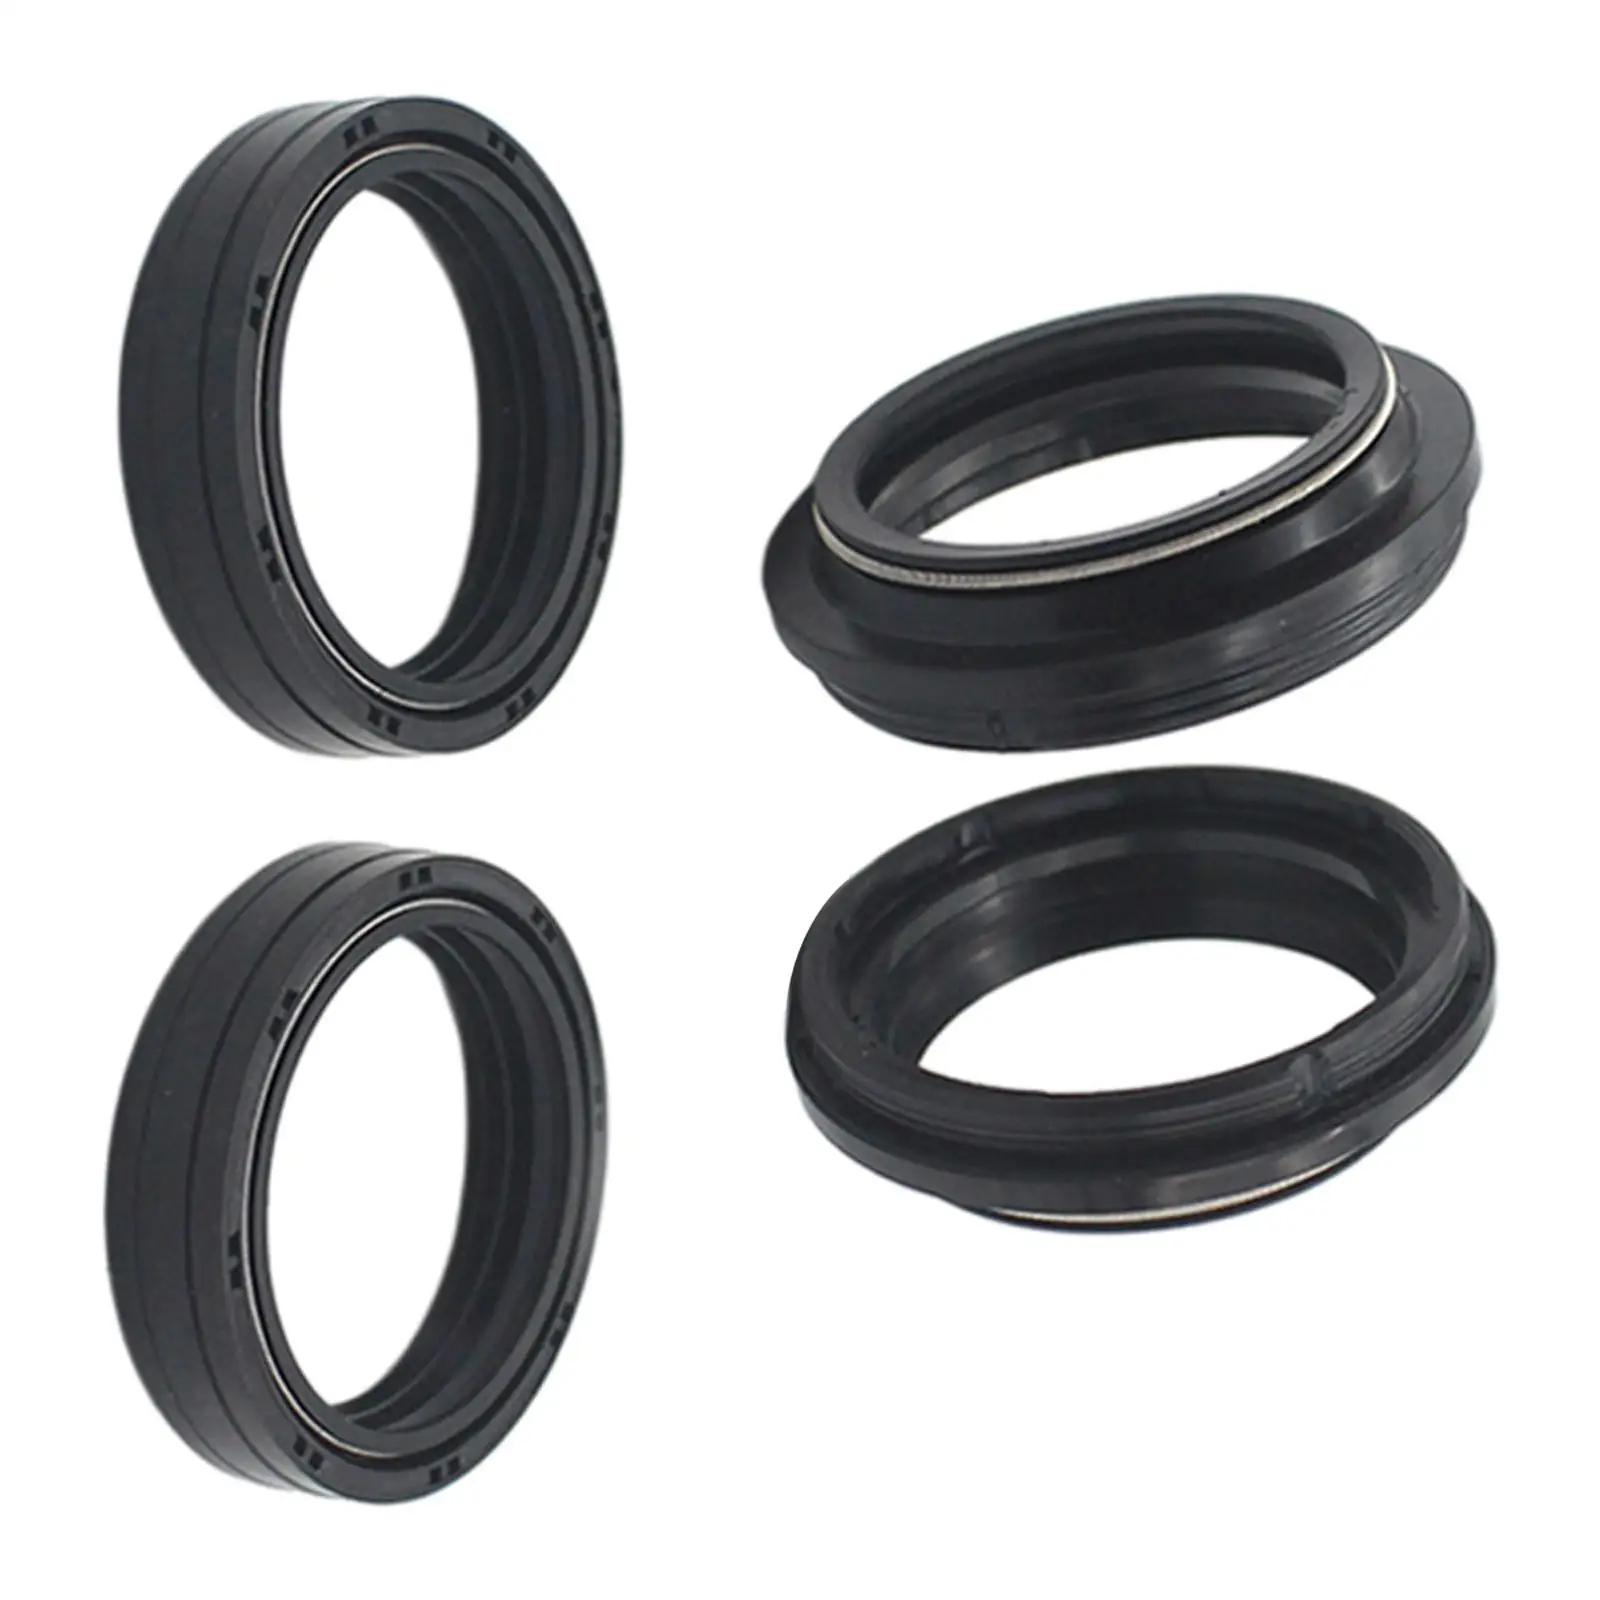 2x Fork and Dust Seal Kit Motorcycle for BMW R1200GS 2004-2012